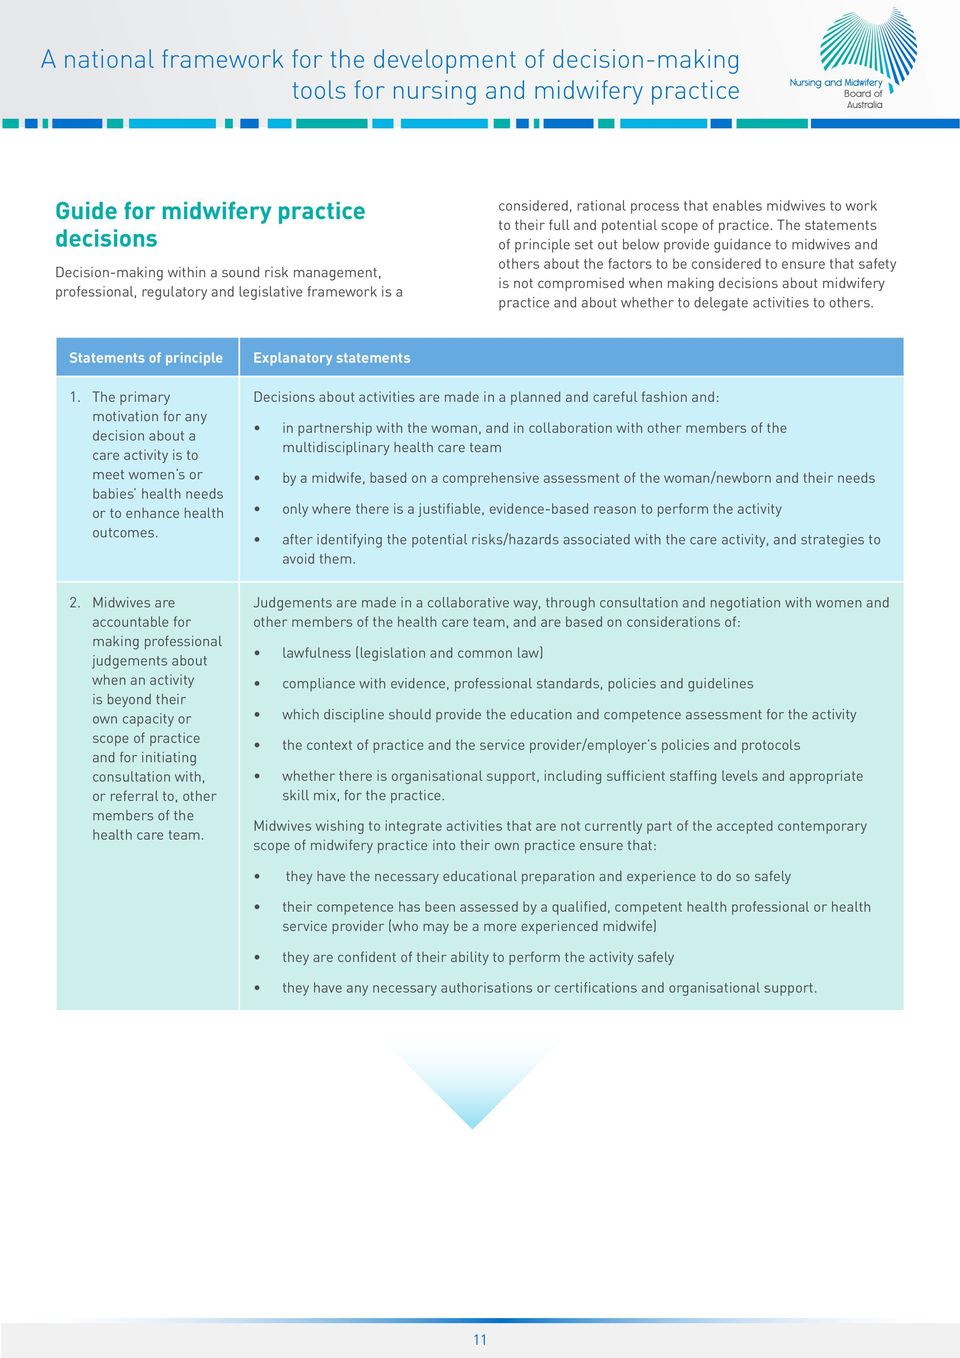 The statements of principle set out below provide guidance to midwives and others about the factors to be considered to ensure that safety is not compromised when making decisions about midwifery